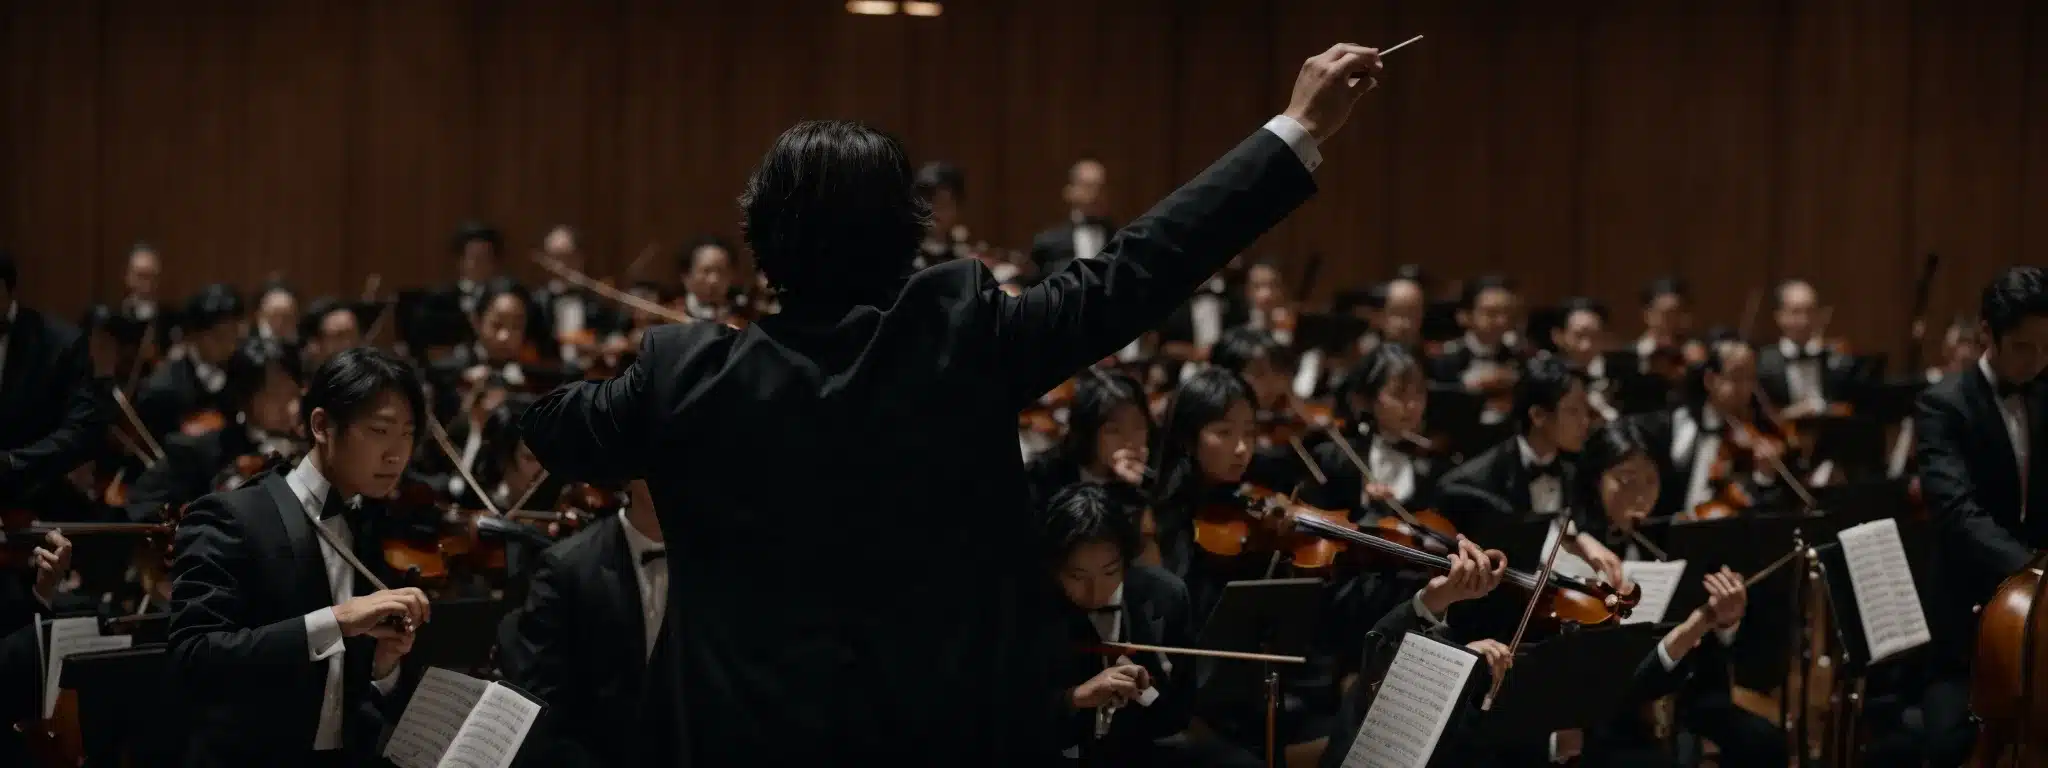 A Conductor Leading An Orchestra With Seamless Coordination And Focused Intensity.